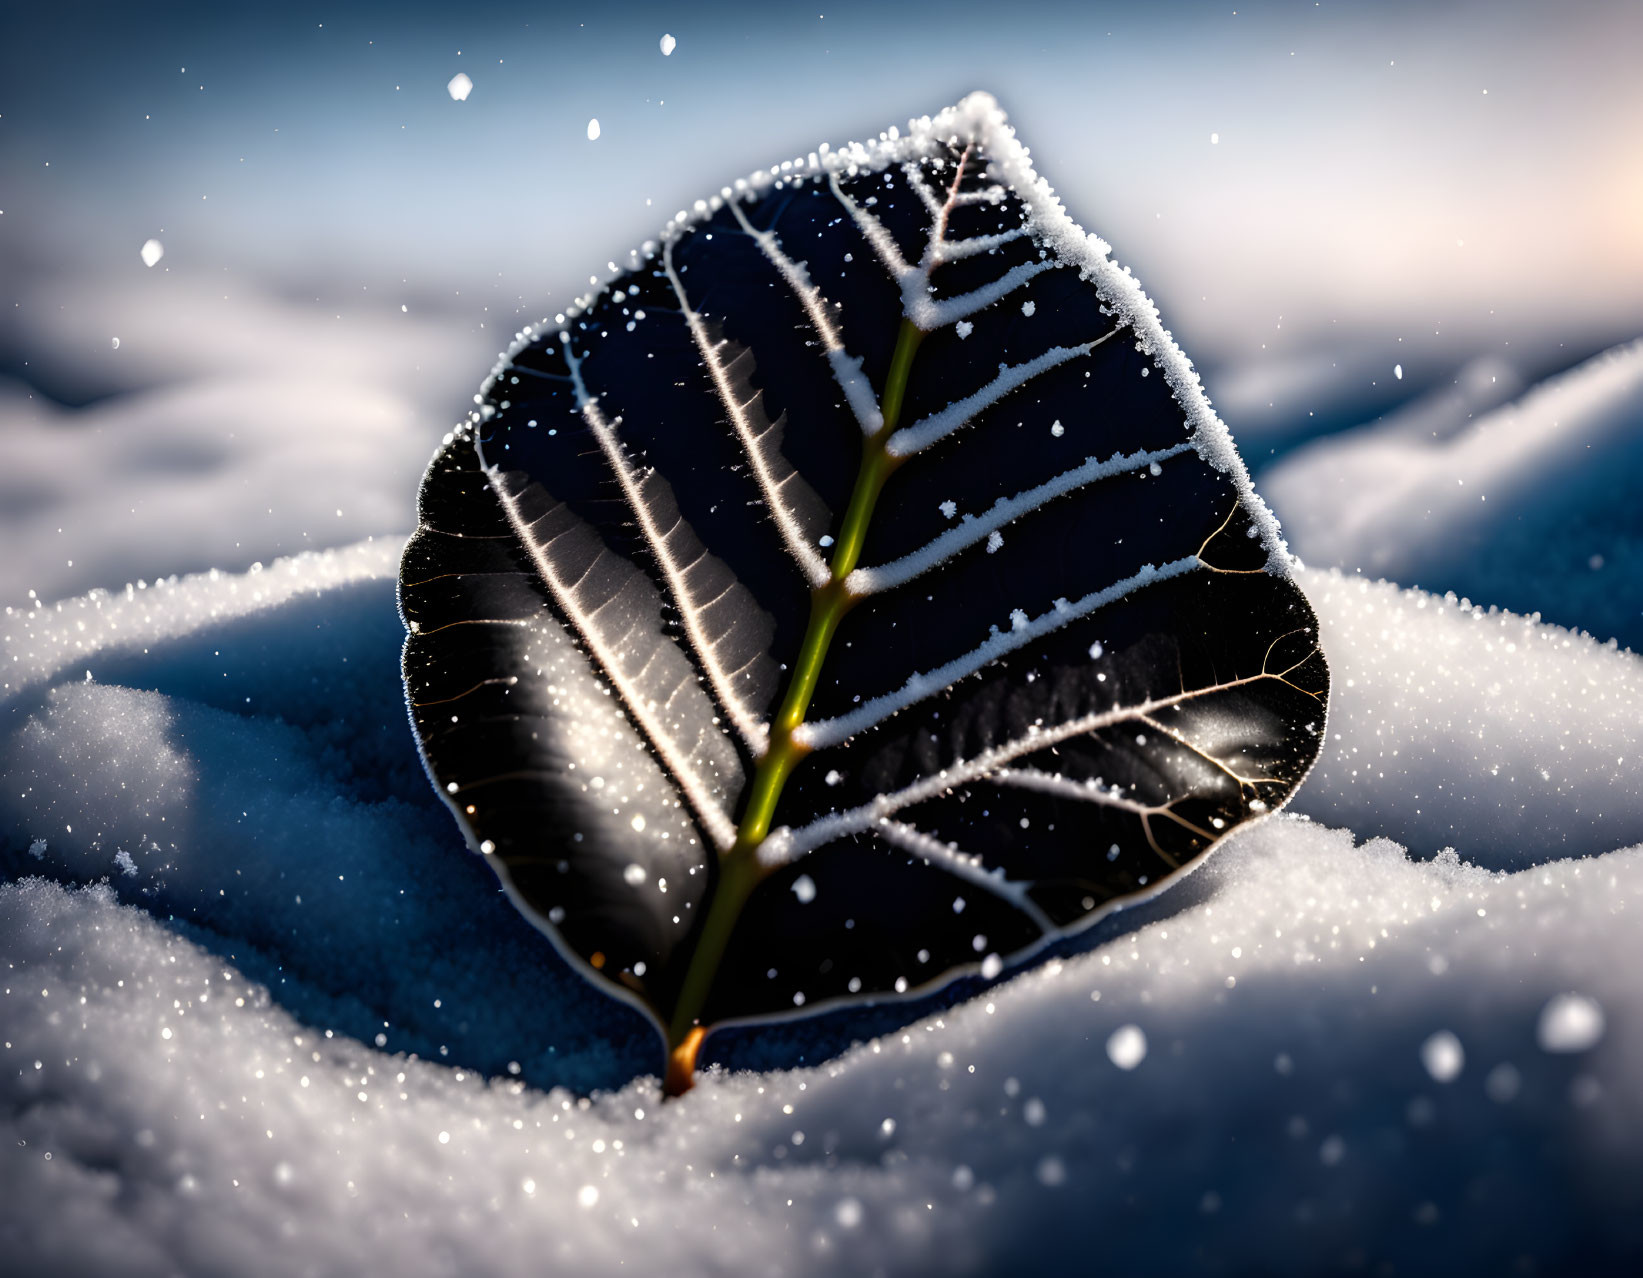 Frost-covered leaf in sparkling snow with icy veins against wintry background